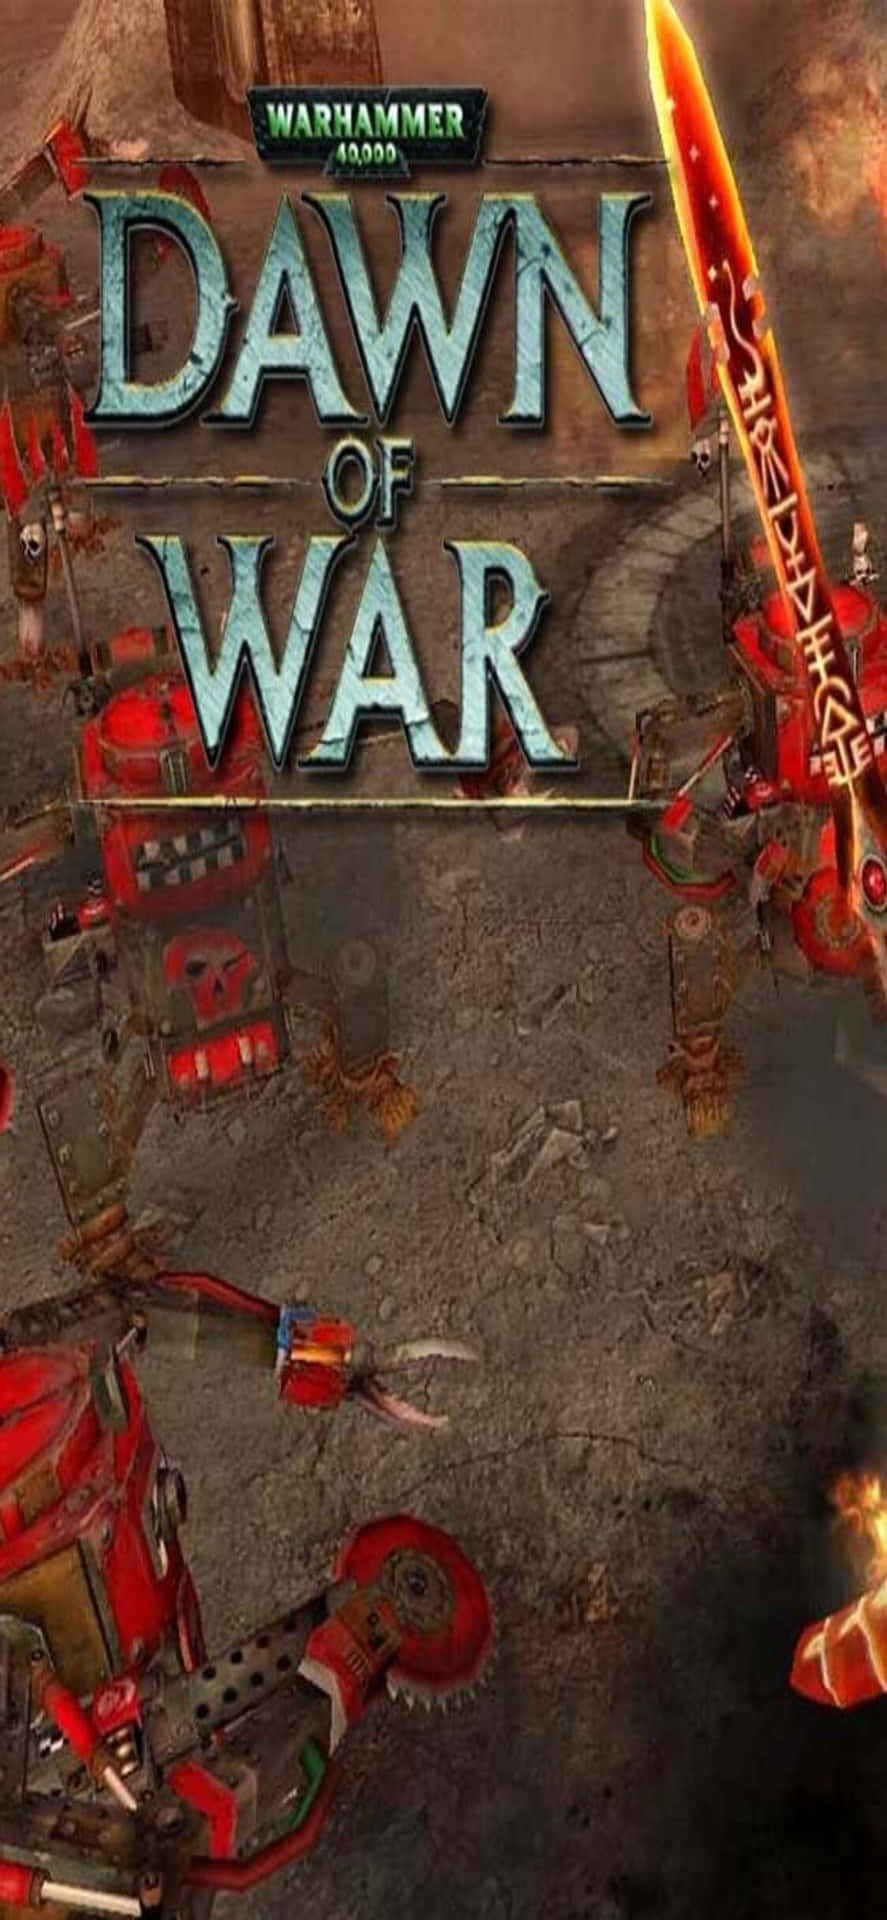 Explore the dark and chaotic world of Dawn of War III in high definition on your iPhone X